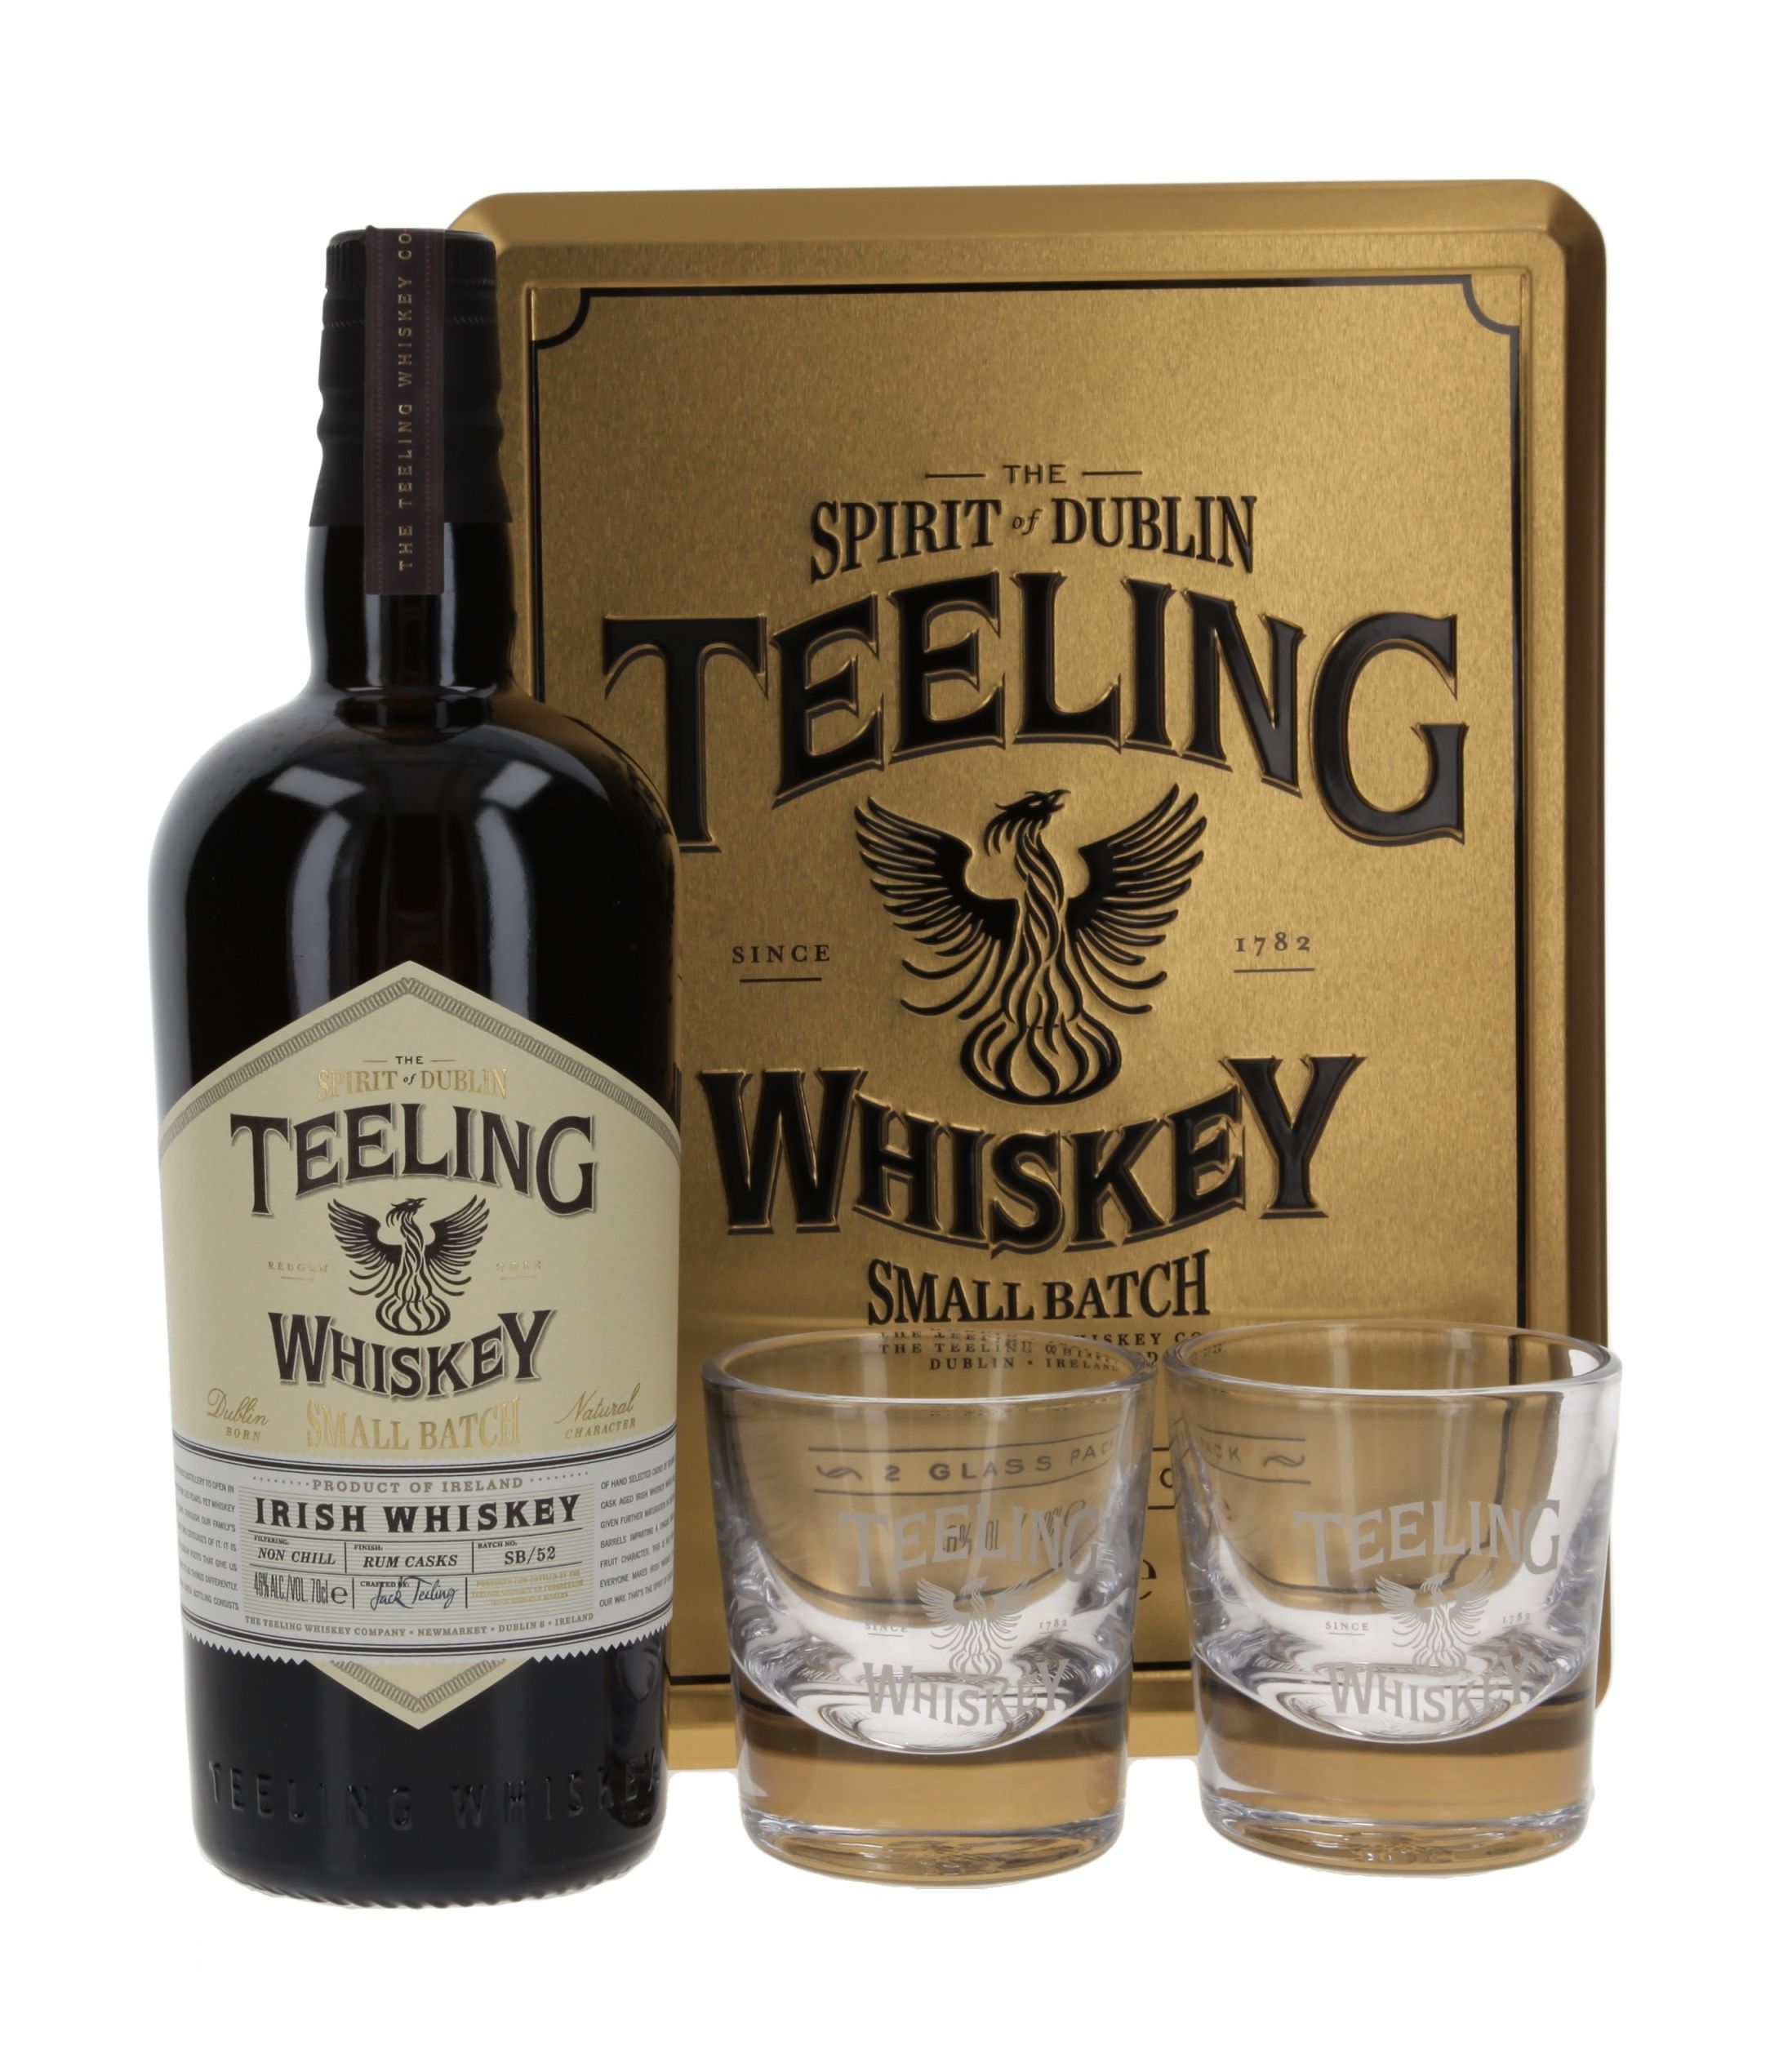 https://www.whisky.de/shop/out/pictures/master/product/1/ximage_TEELI0SB2_1.jpg,q1676681289.pagespeed.ic.of4B4LqRzQ.jpg